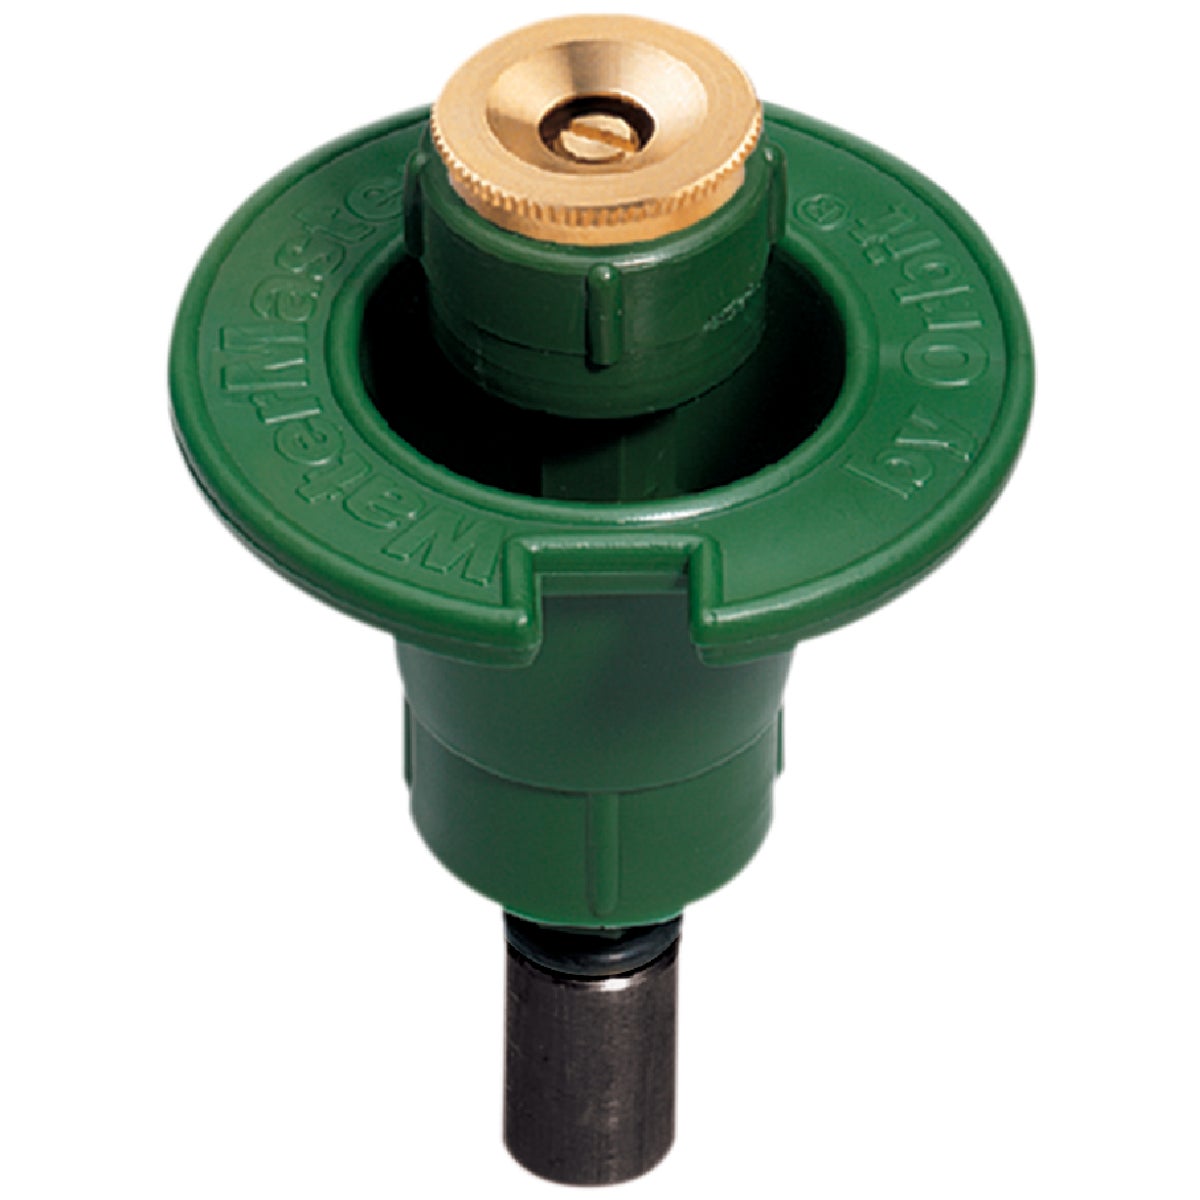 Item 734632, Plastic pop-up sprinkler head with a solid brass insert nozzle.